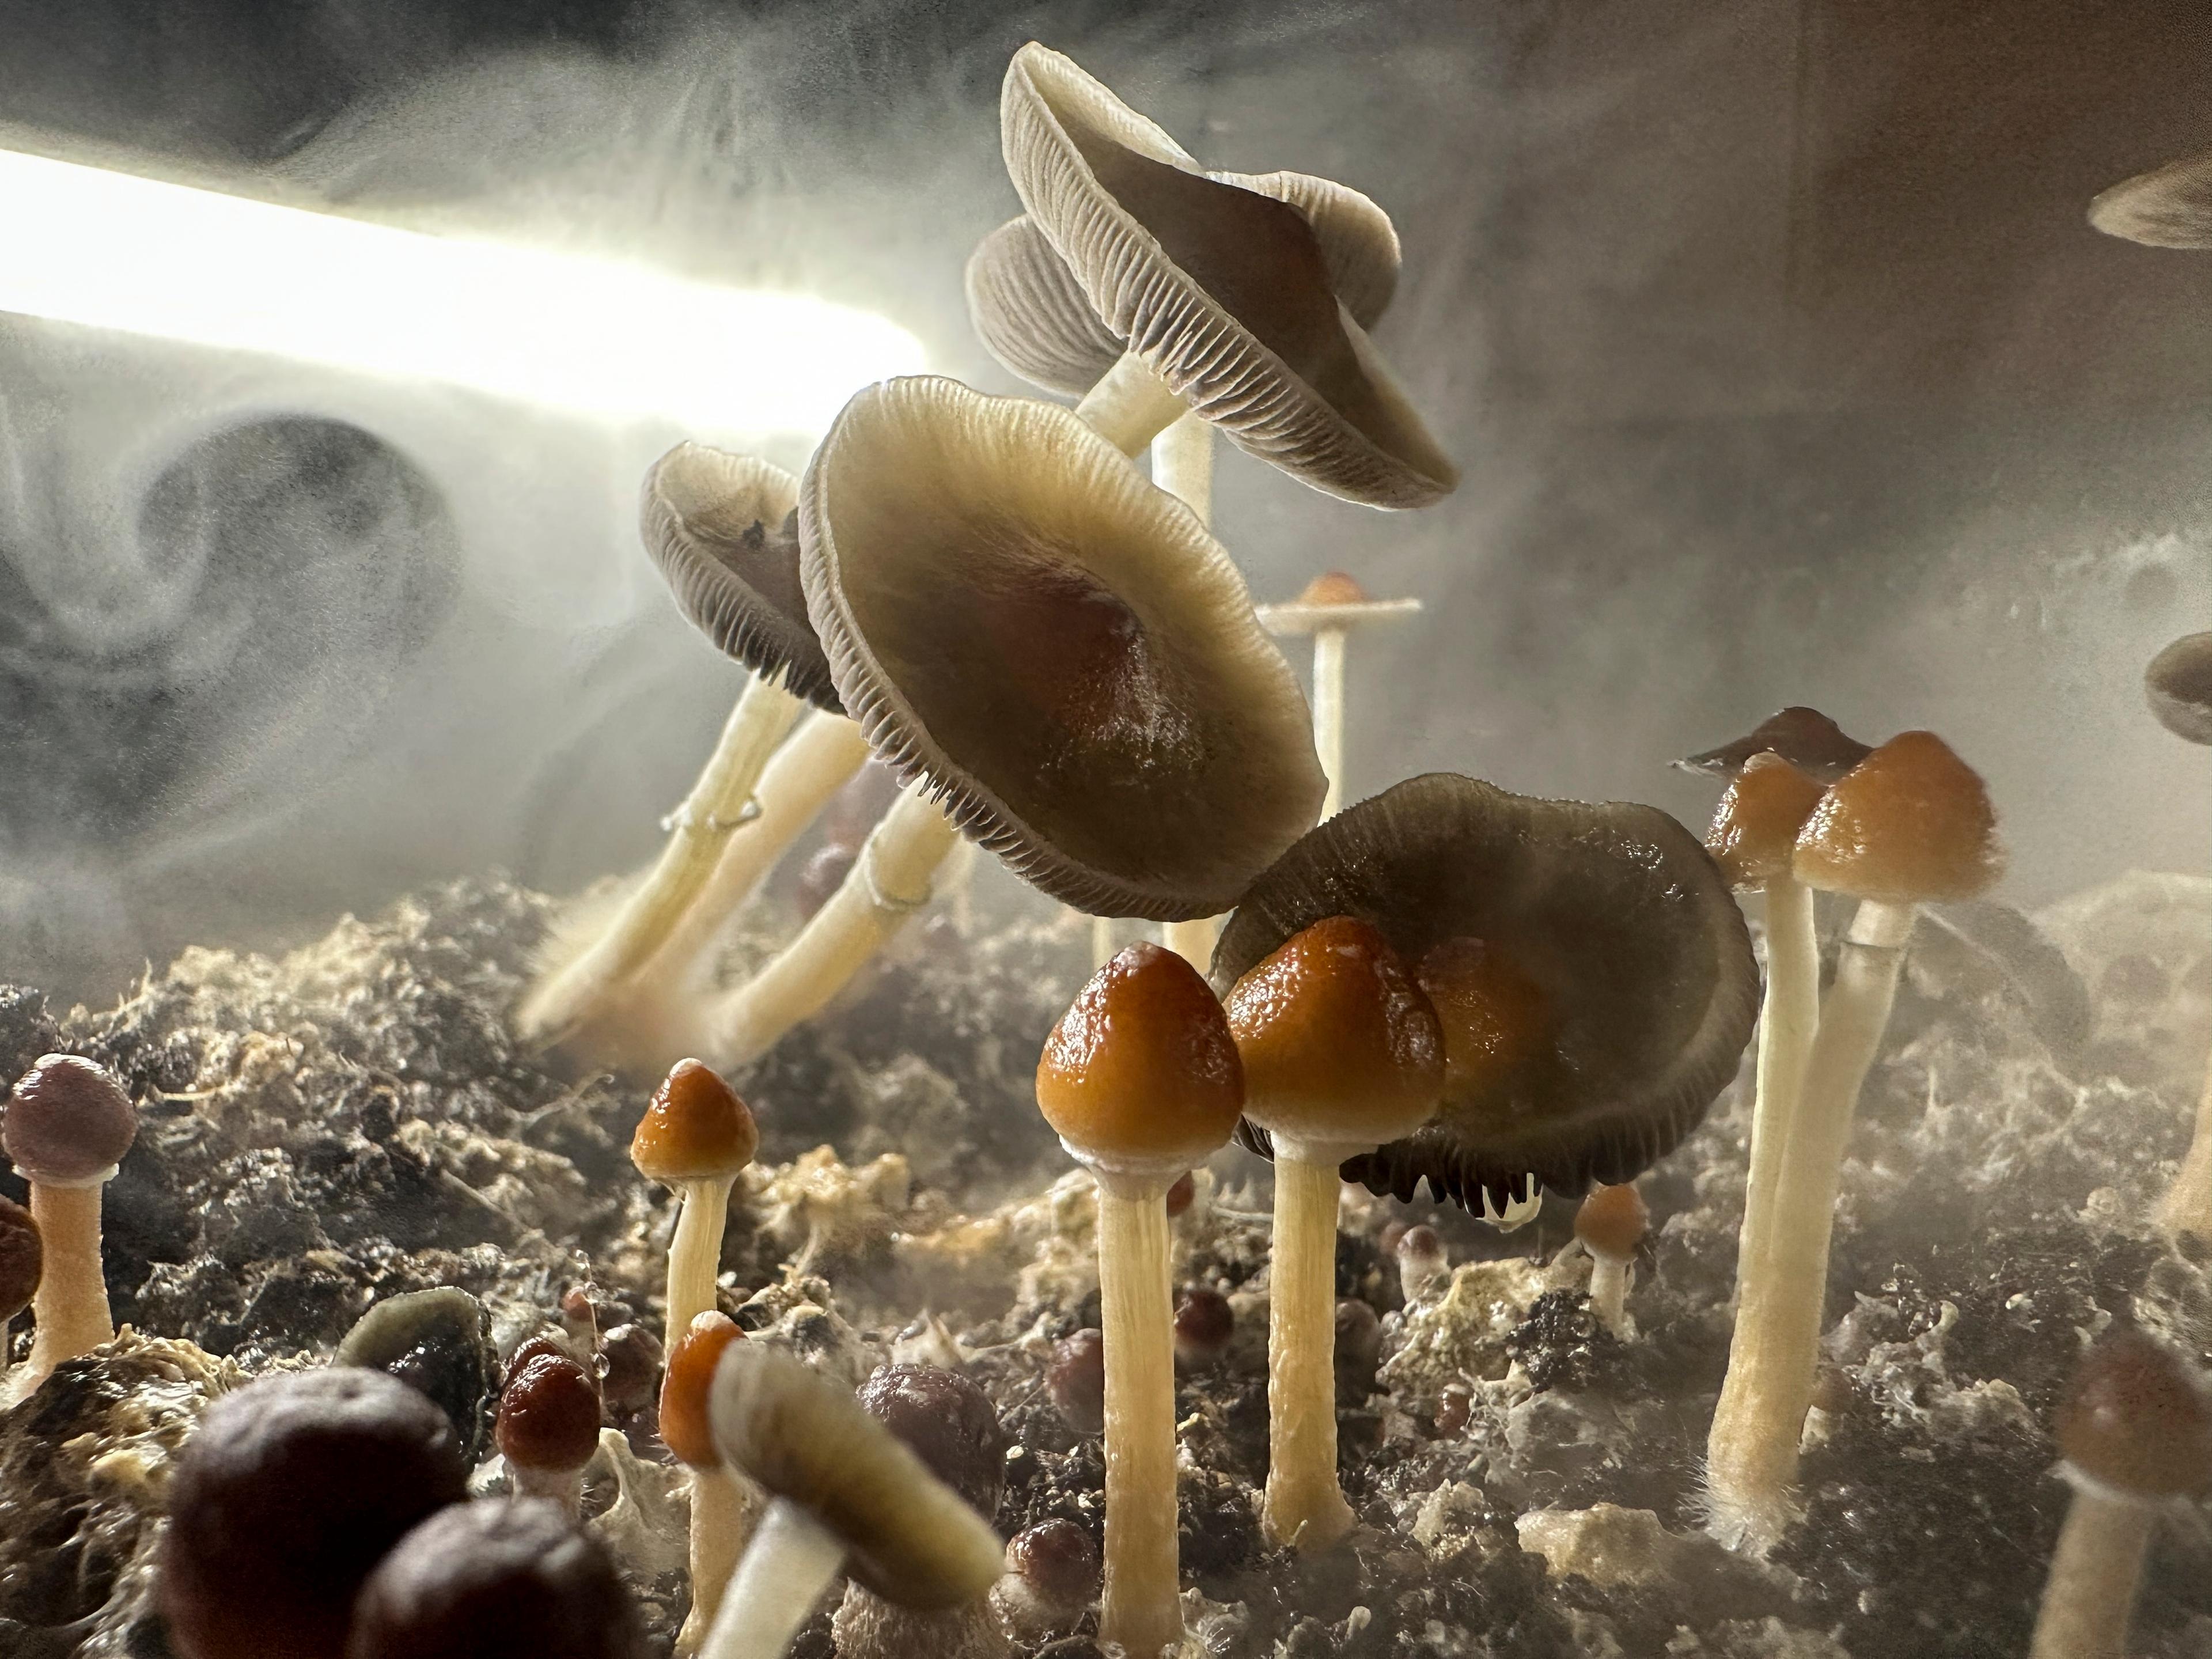 Revamped ‘Magic Mushroom’ Bill Proposes Legal Psychedelic Therapy in California